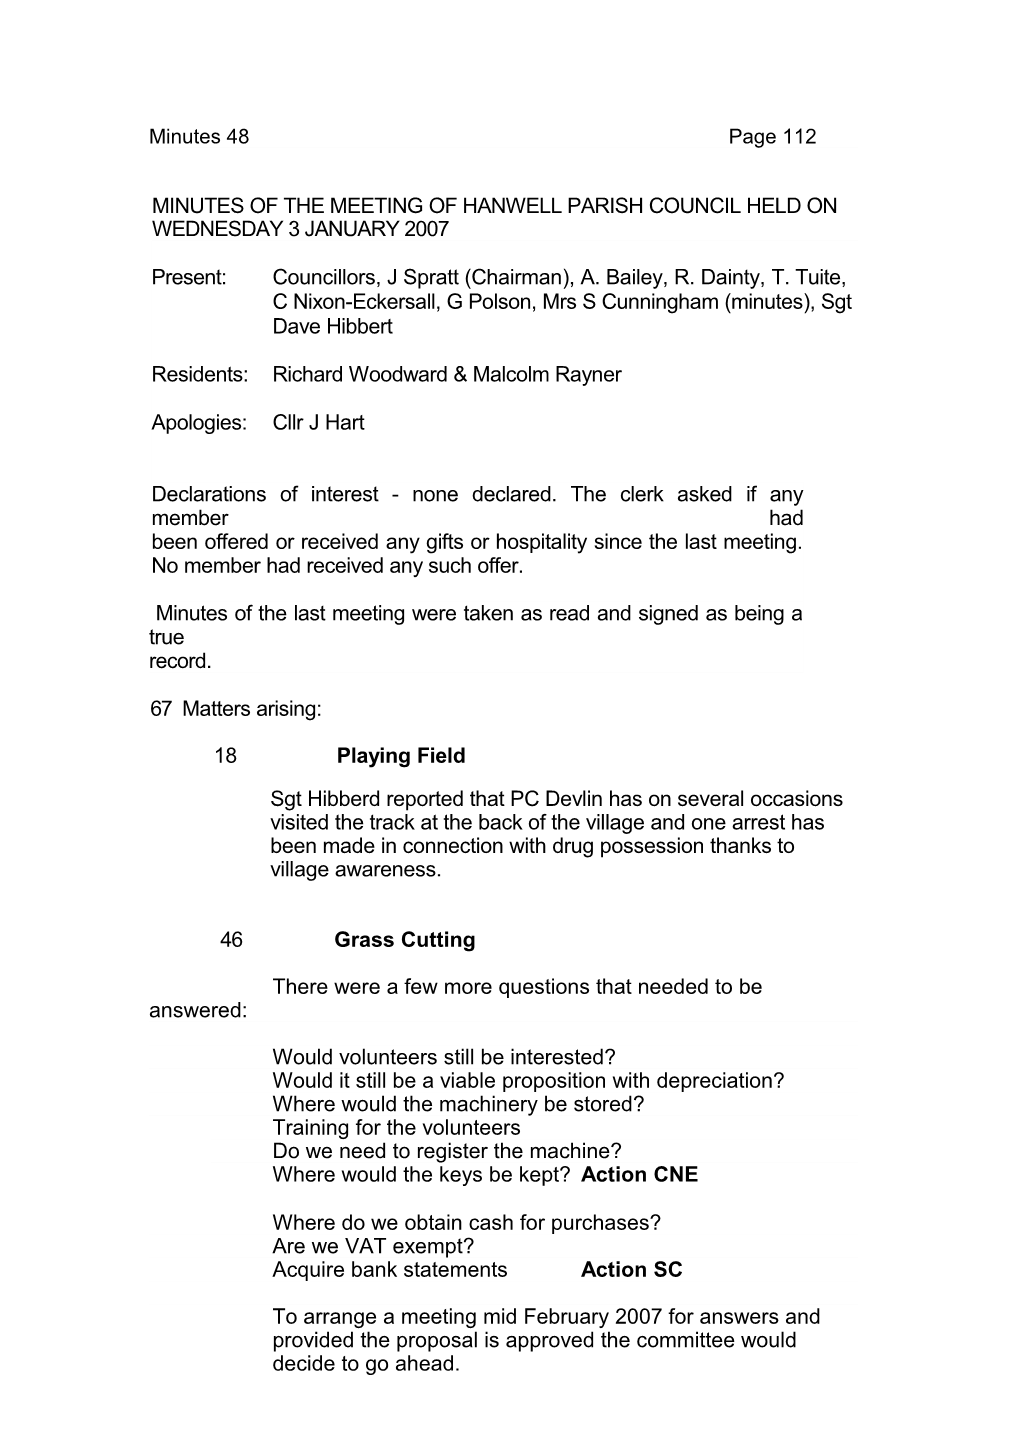 Minutes of the Meeting of Hanwell Parish Council Held on Wednesday 3 January 2007